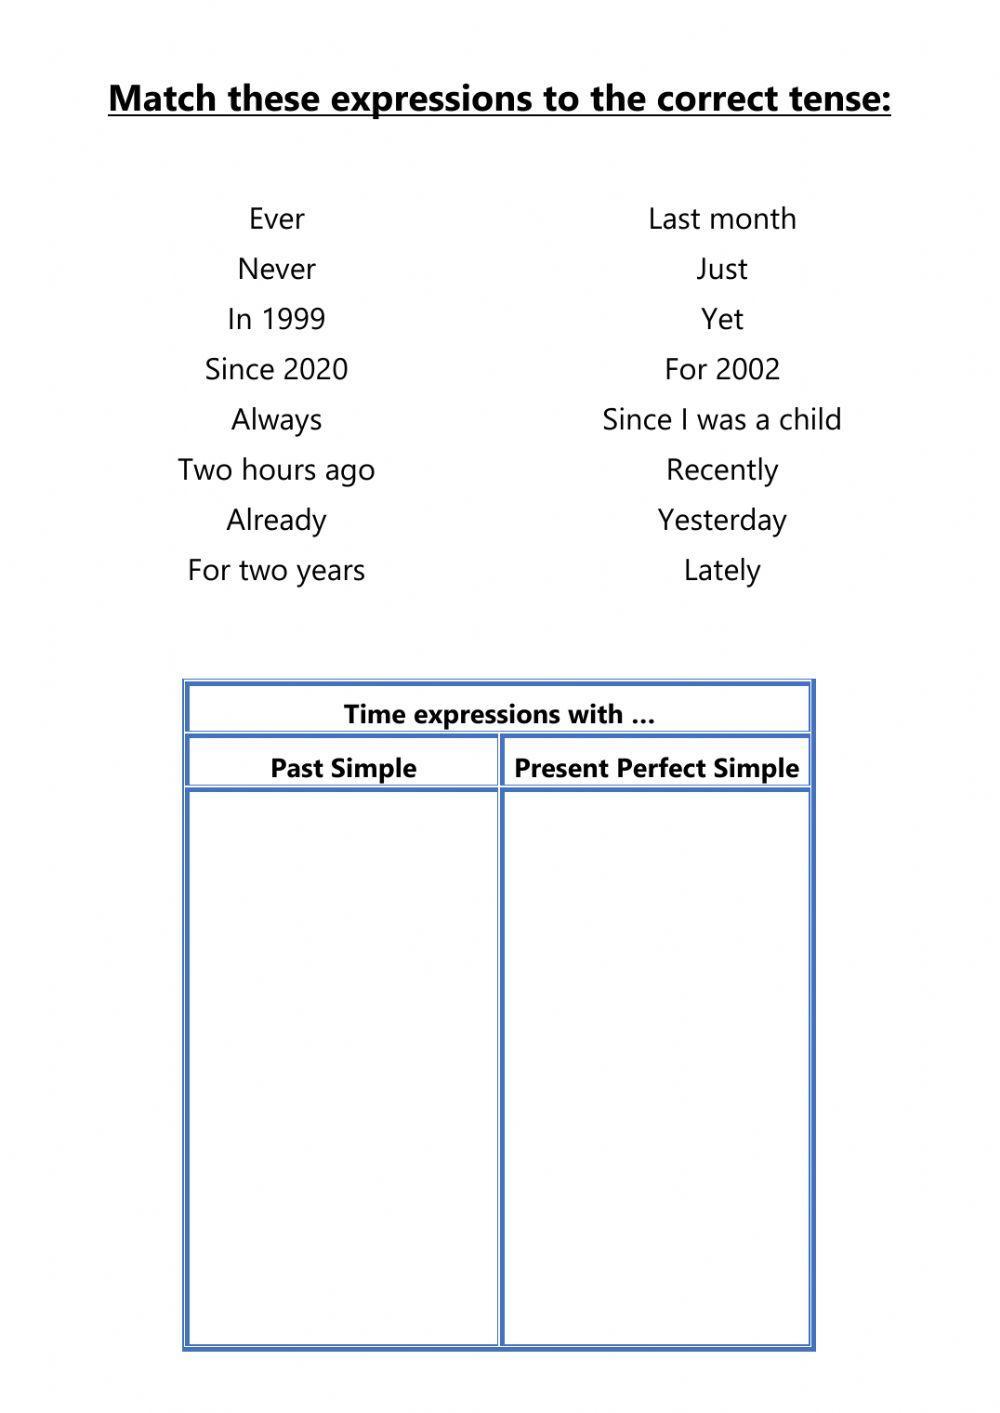 Expressions with Past Simple or Present Perfect Simple